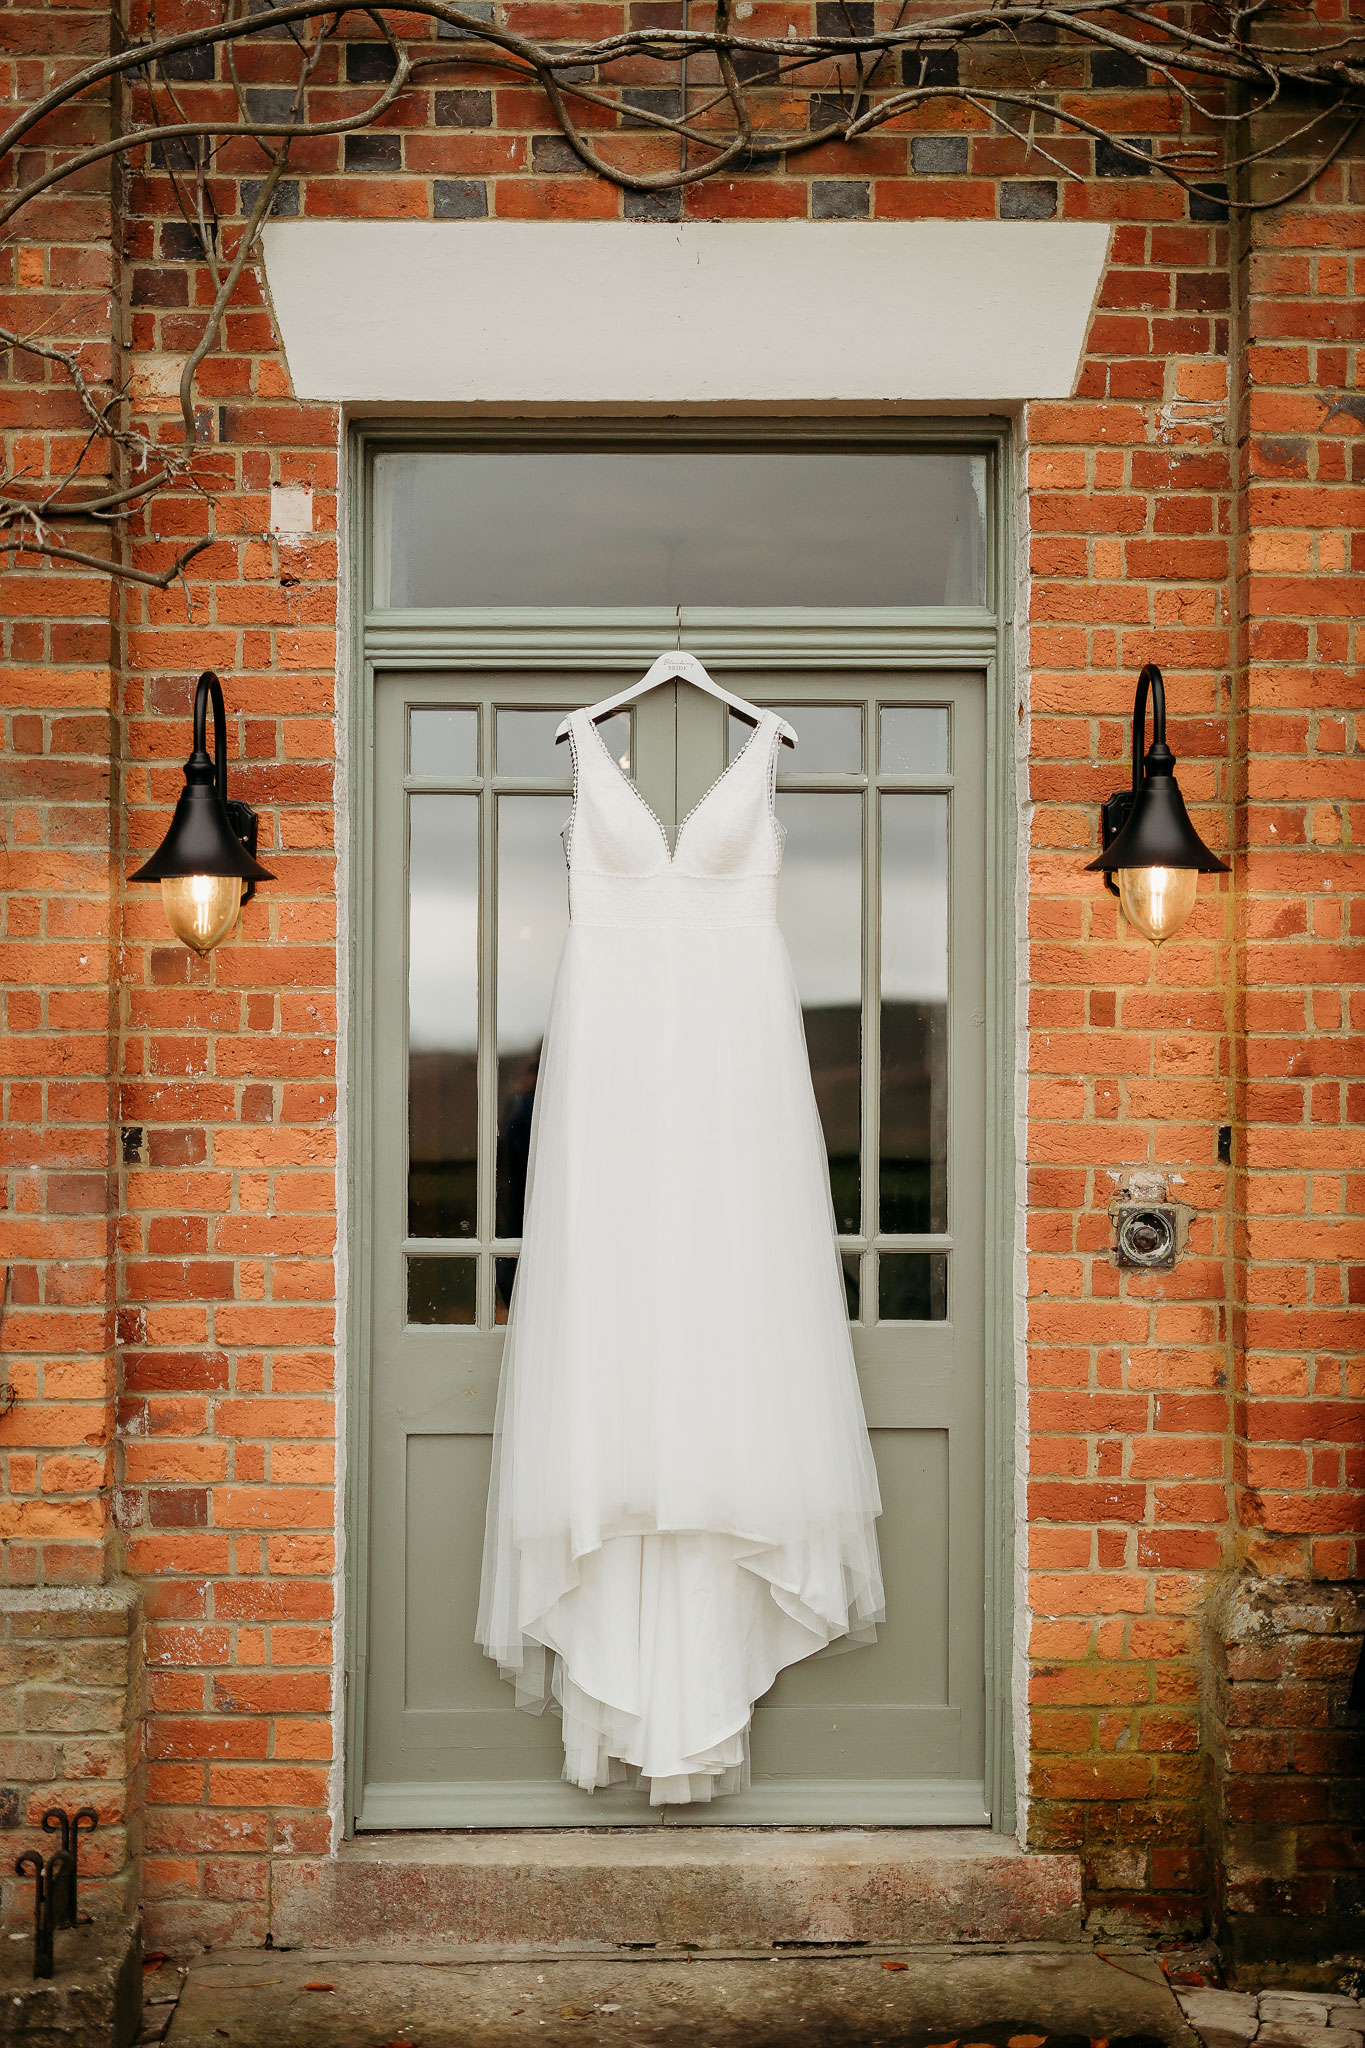 the wedding dress hung up on the green door